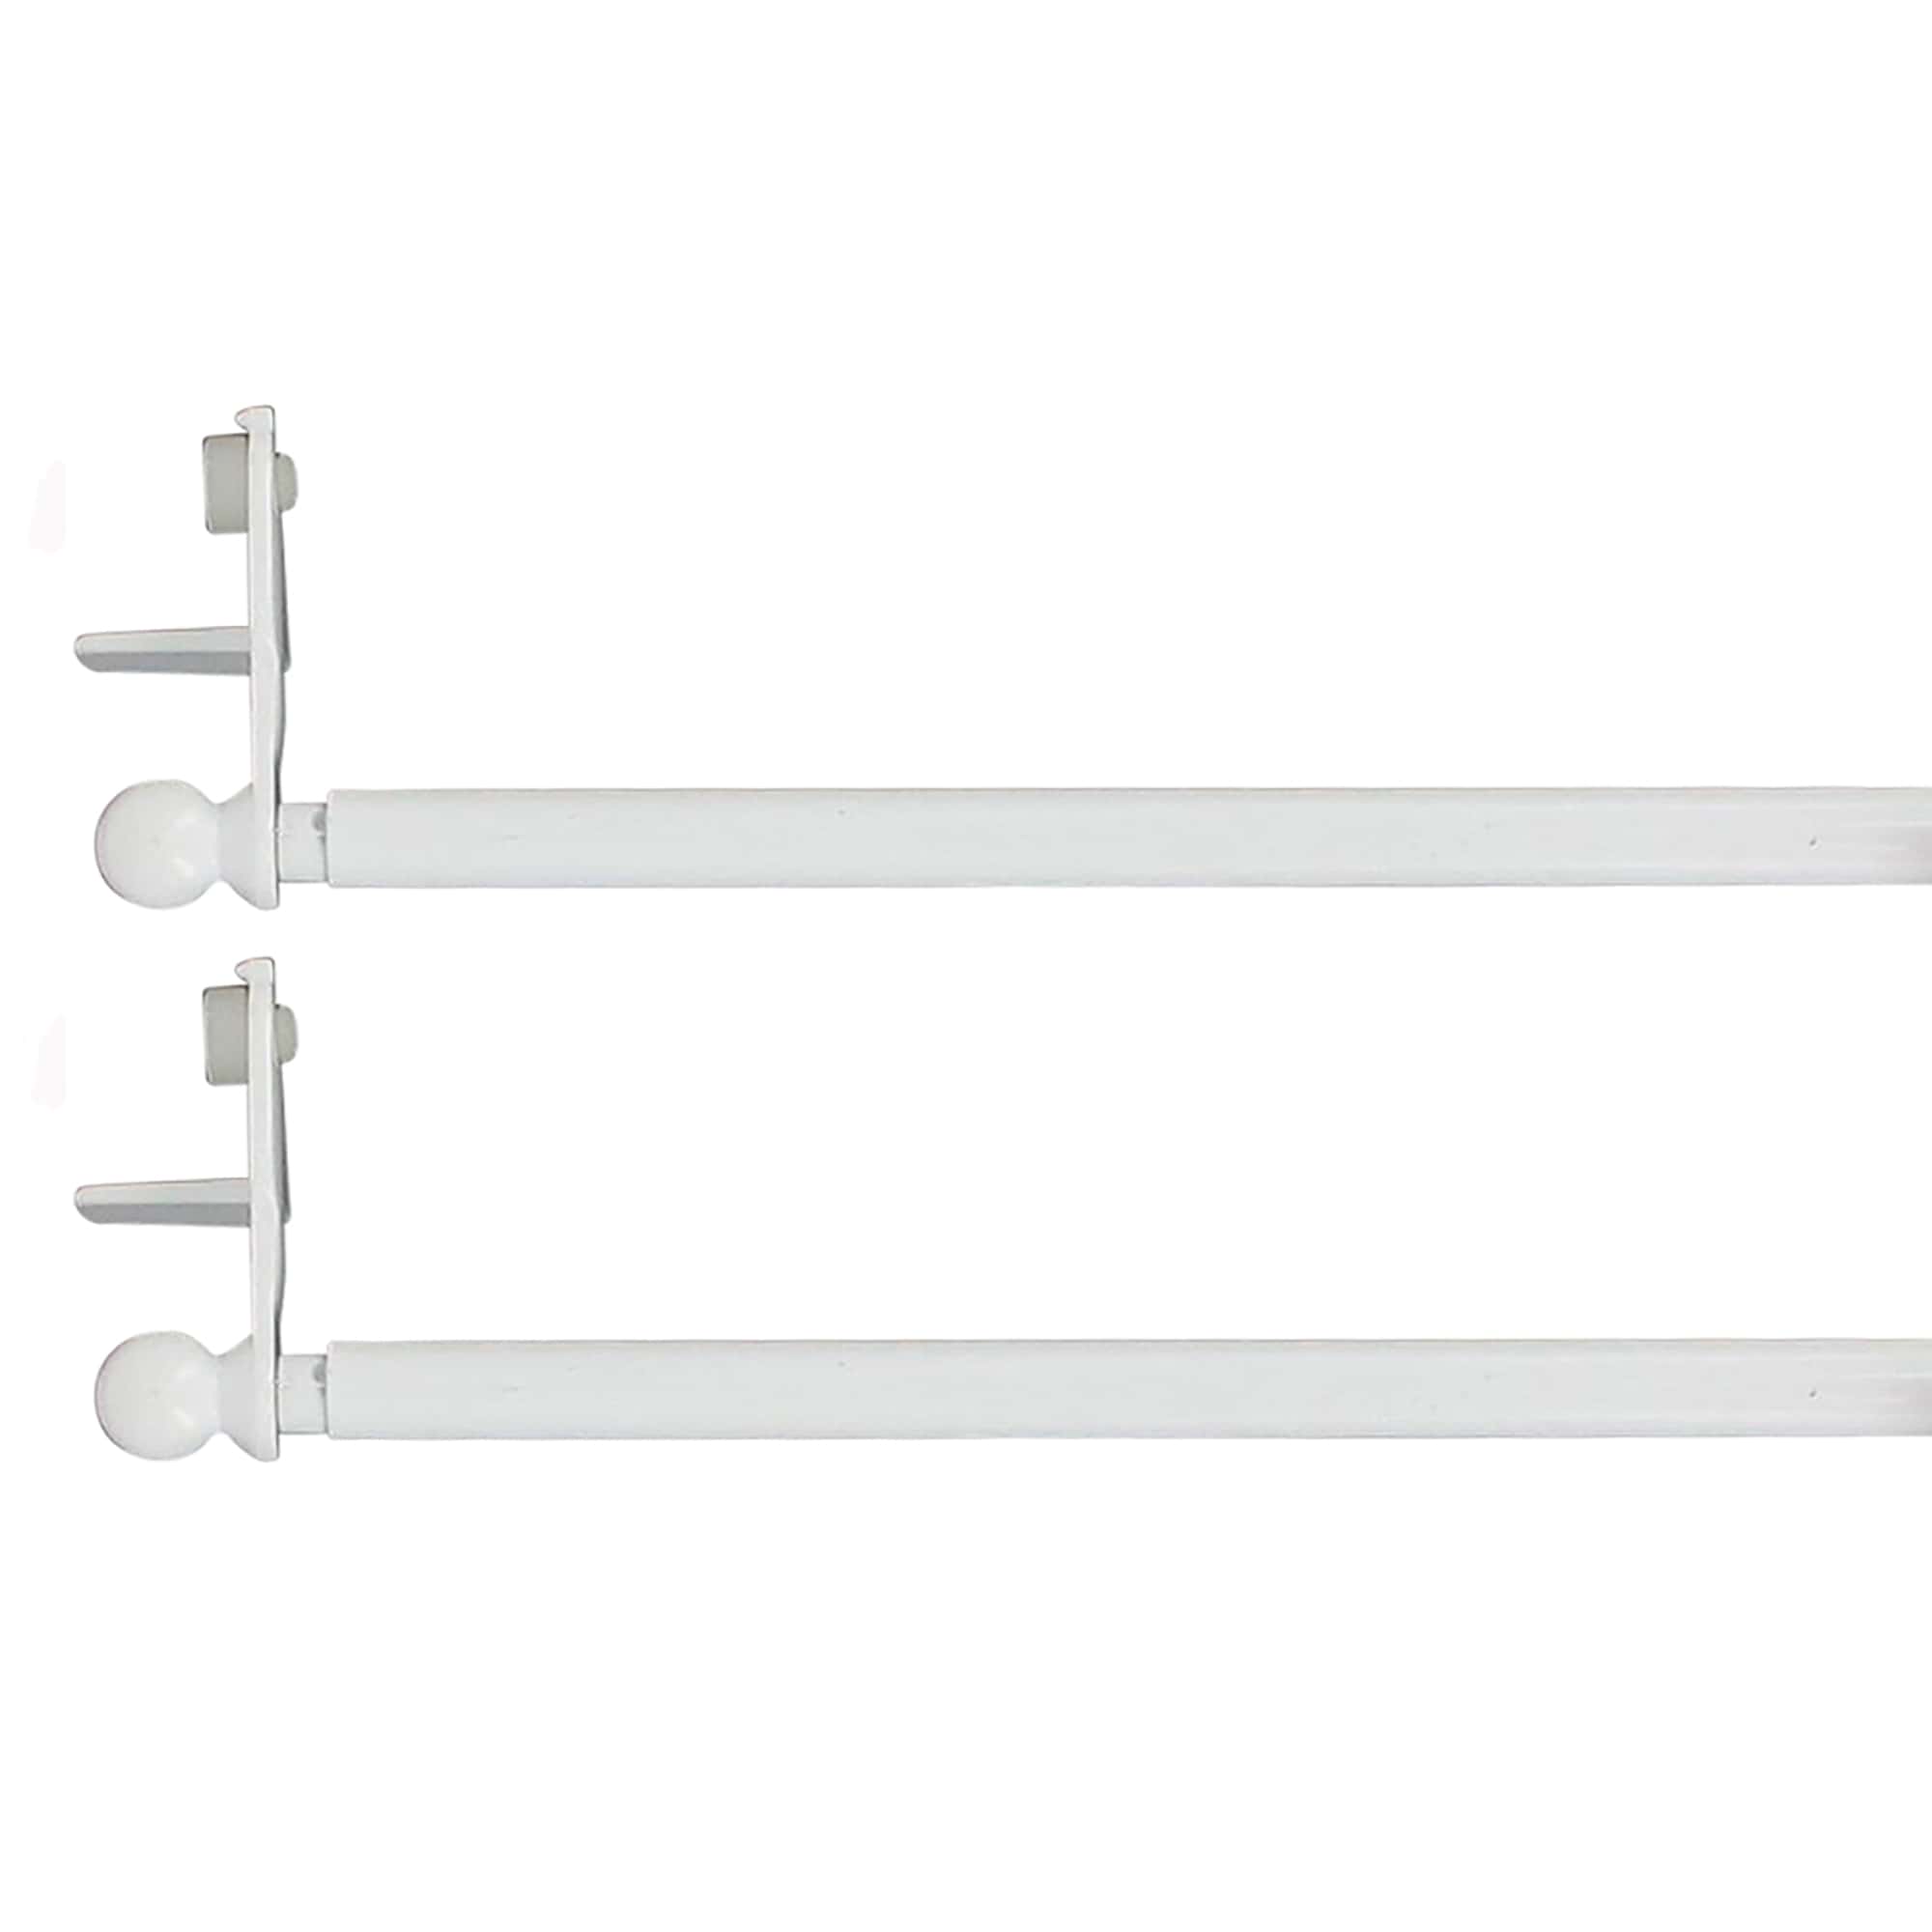 Set of 2 White Adjustable Tension Rods 12"